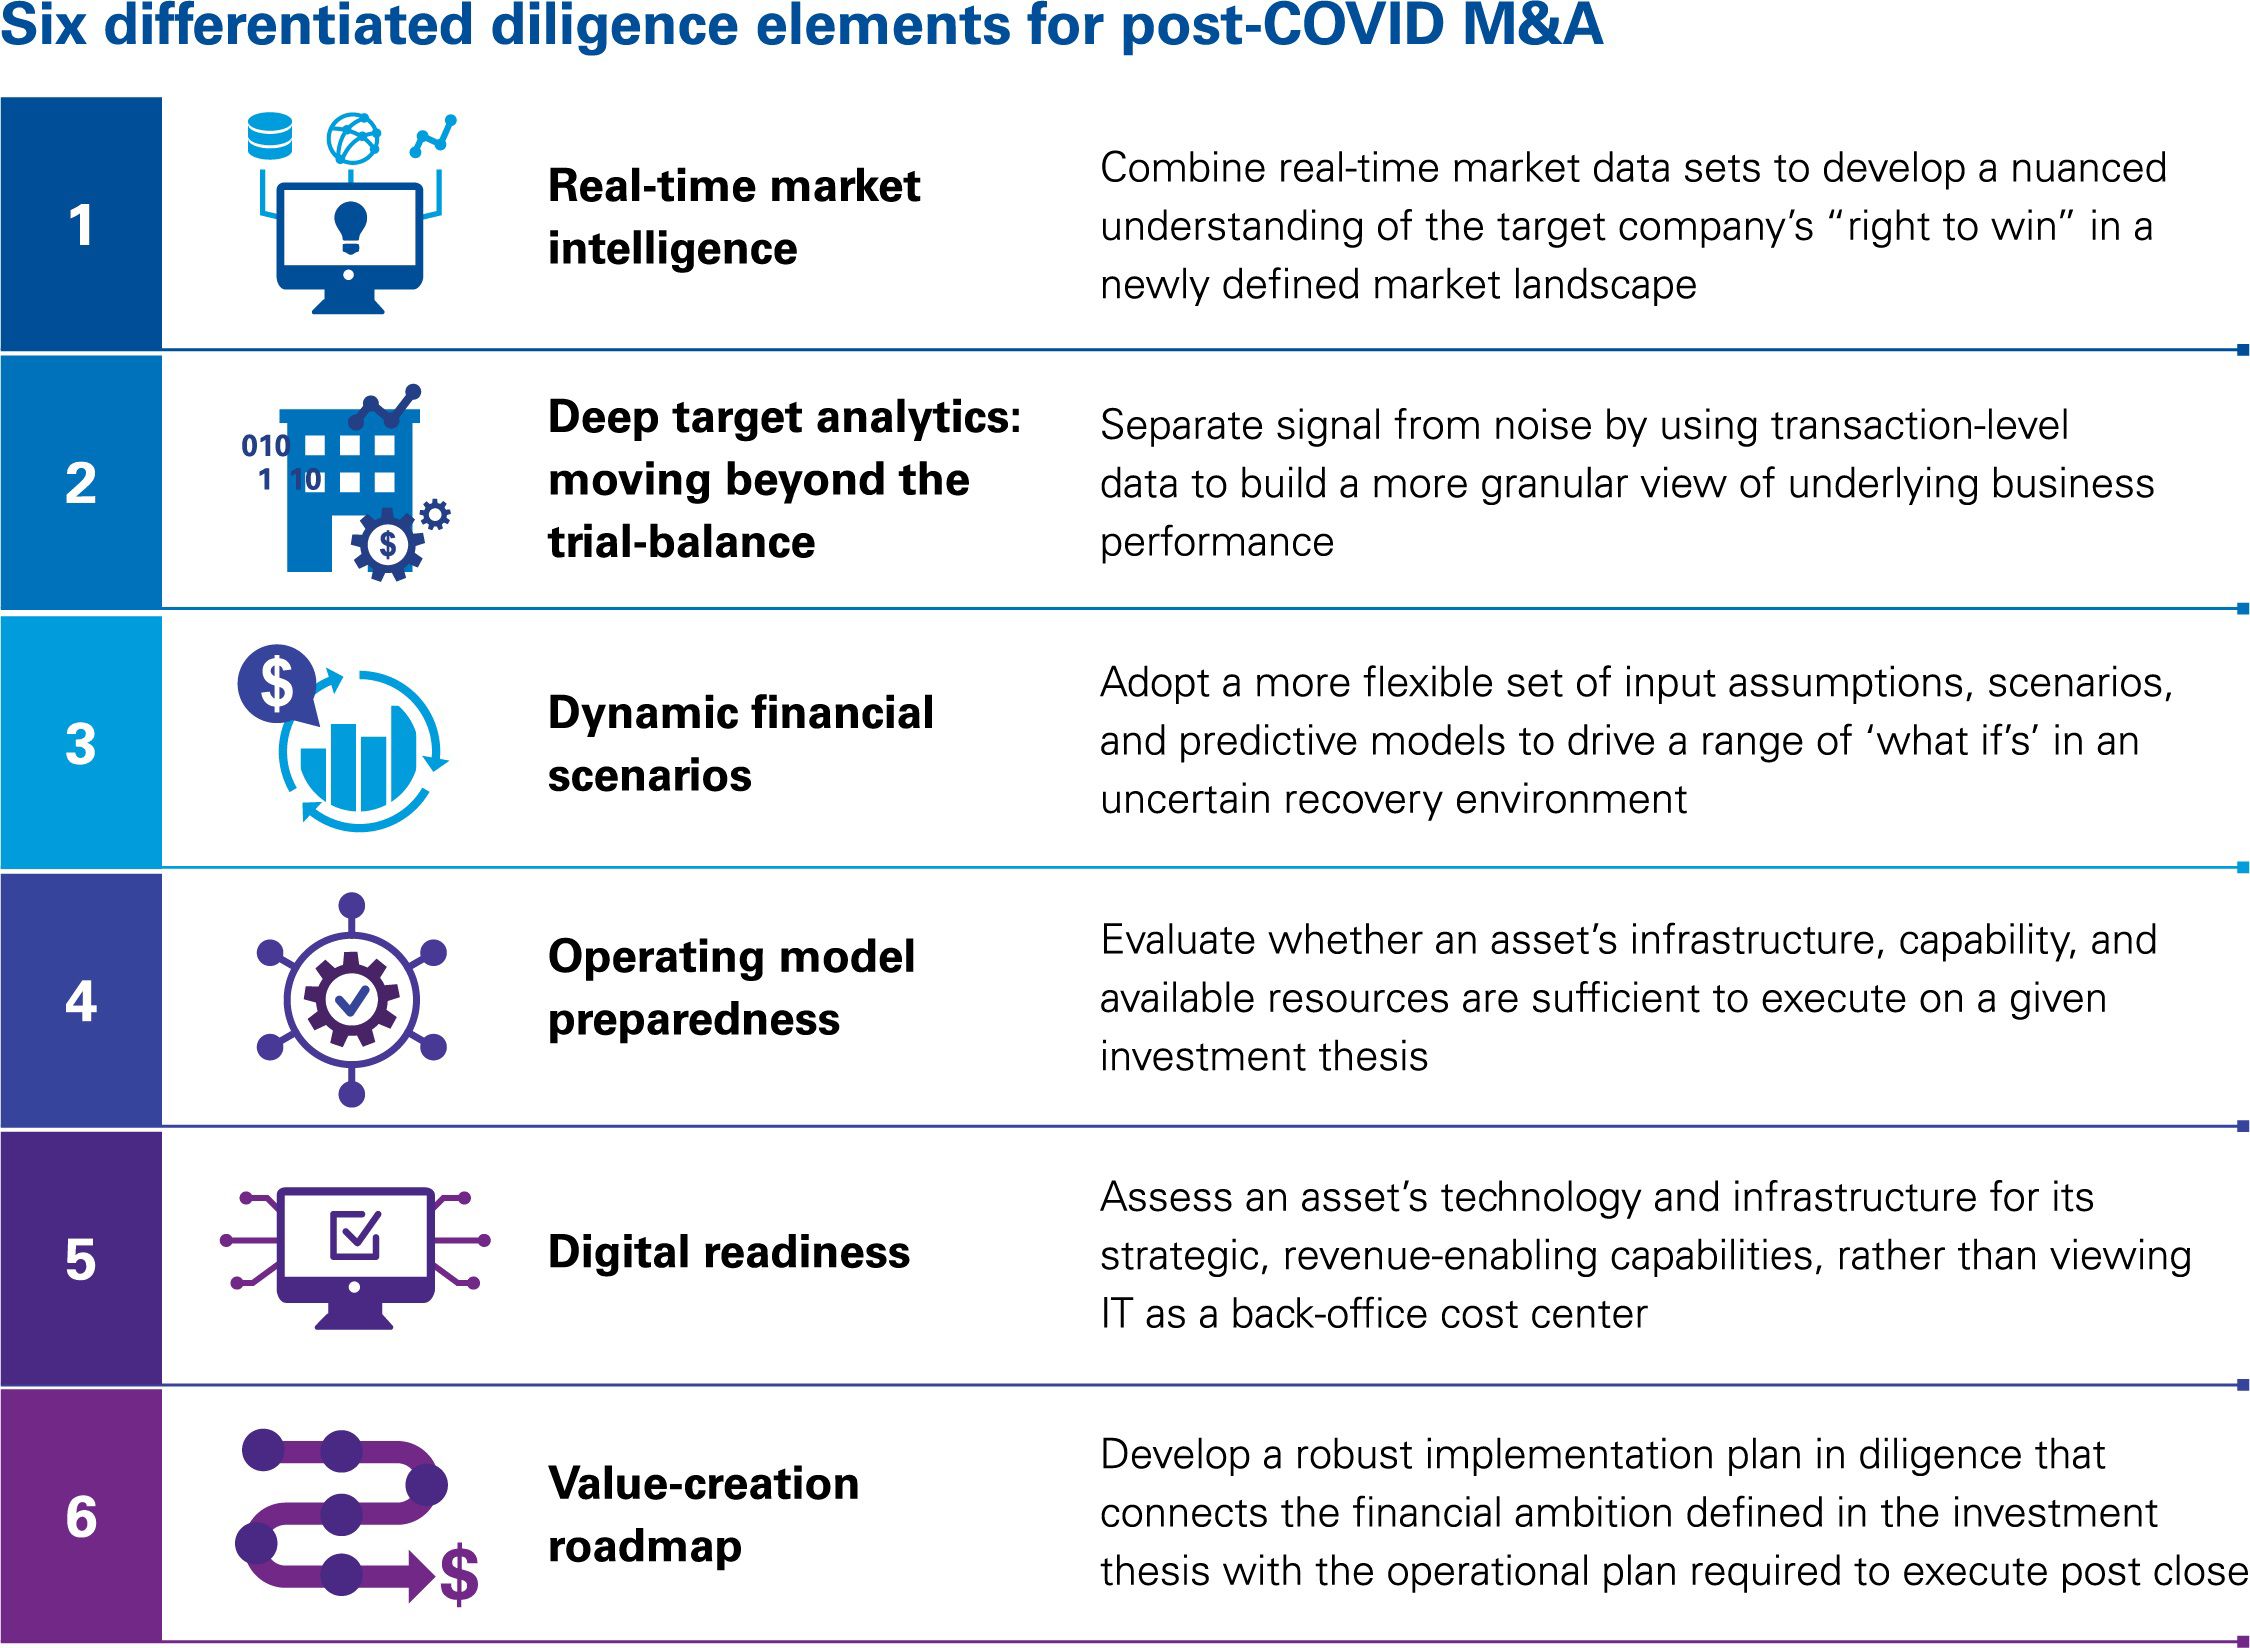 Six differentiated diligence elements for post-COVID M&A